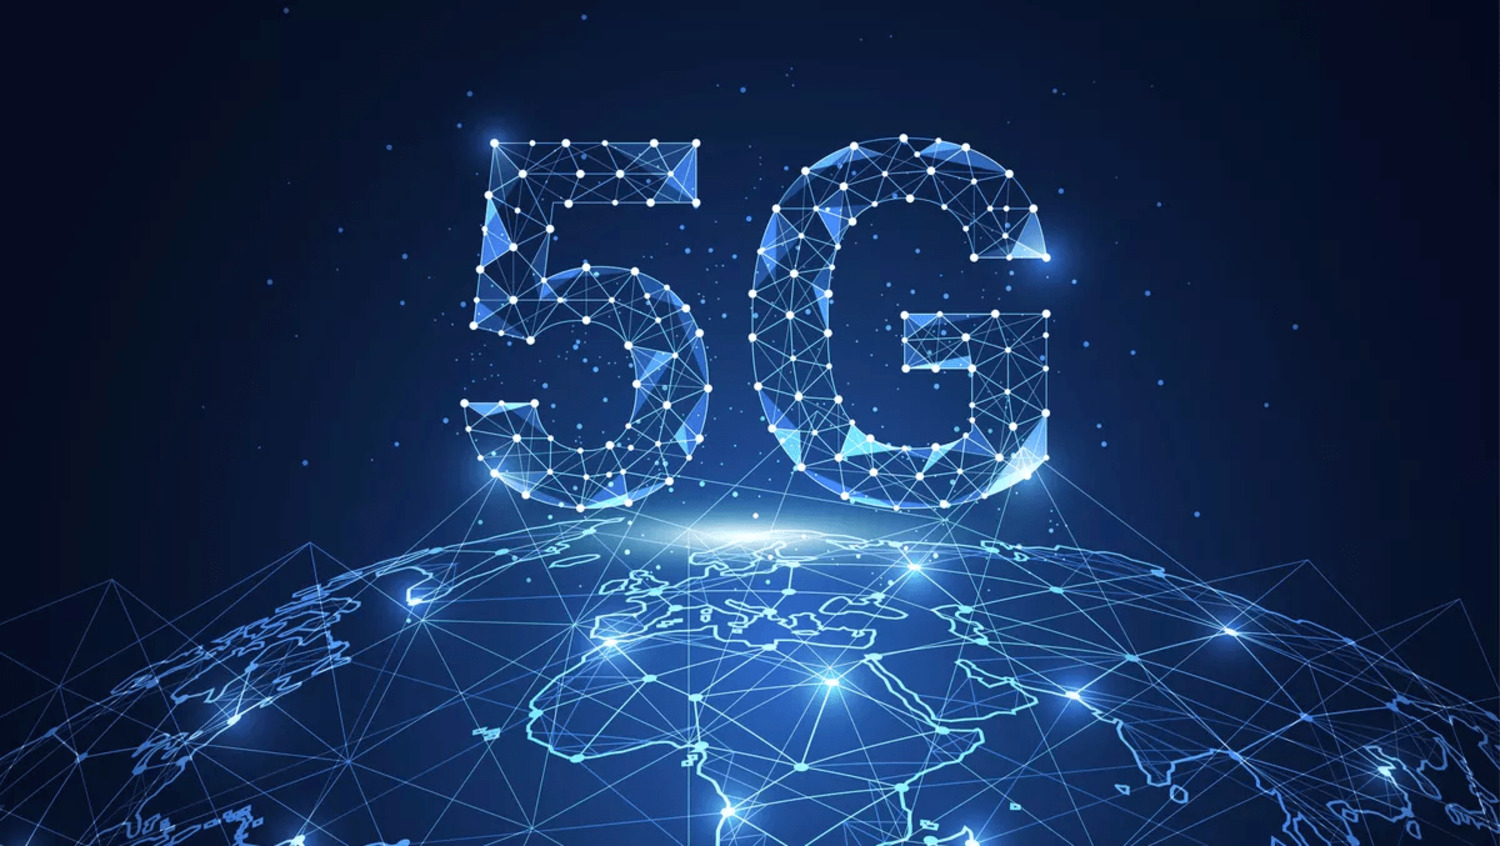 ⭕️The FASTEST 5G MODEM to date. and what the future may hold